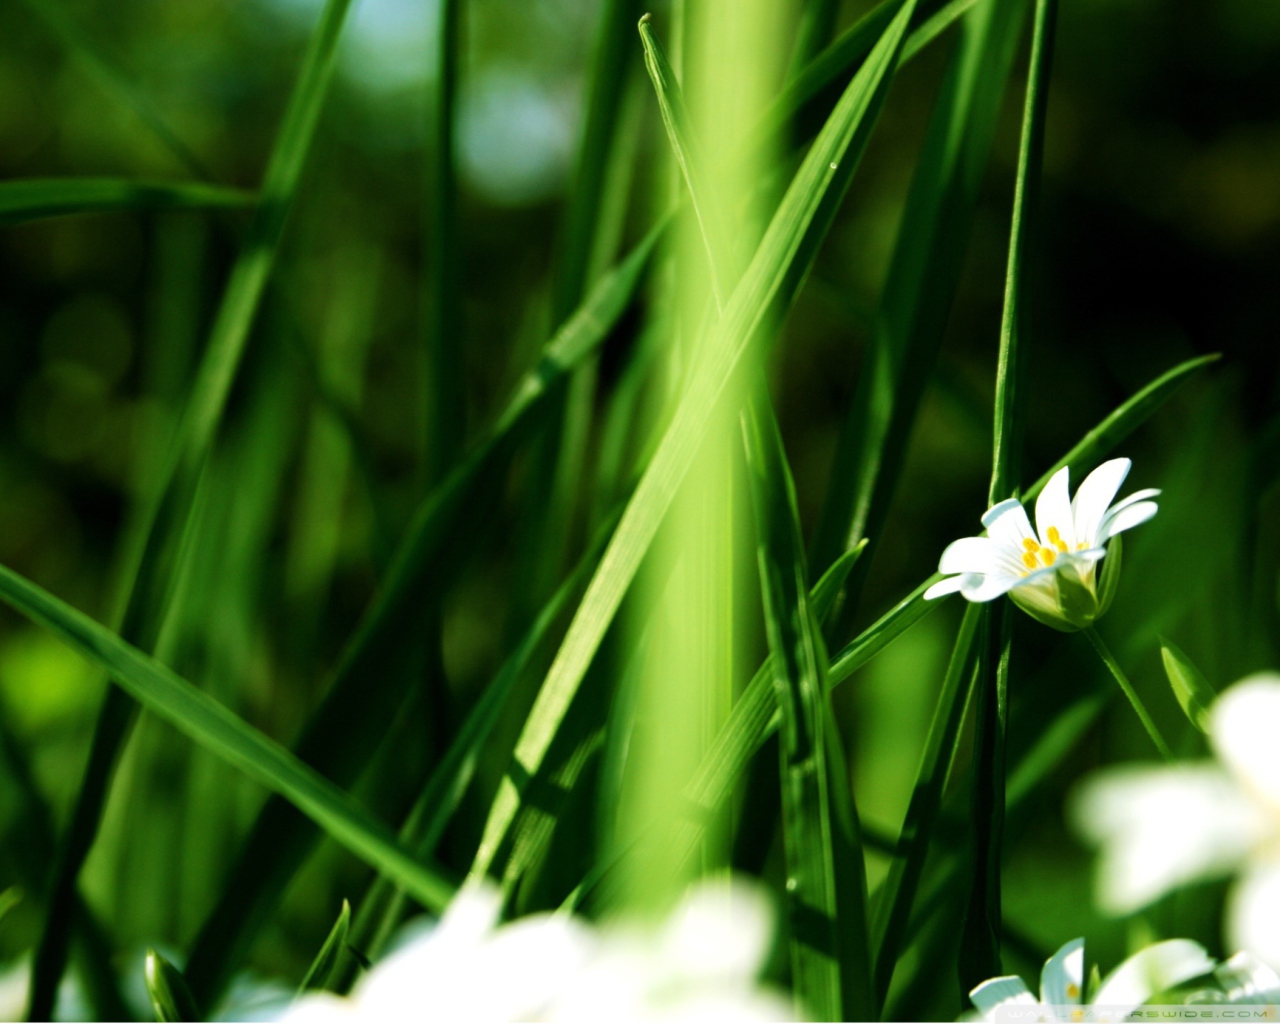 Grass And White Flowers wallpaper 1280x1024